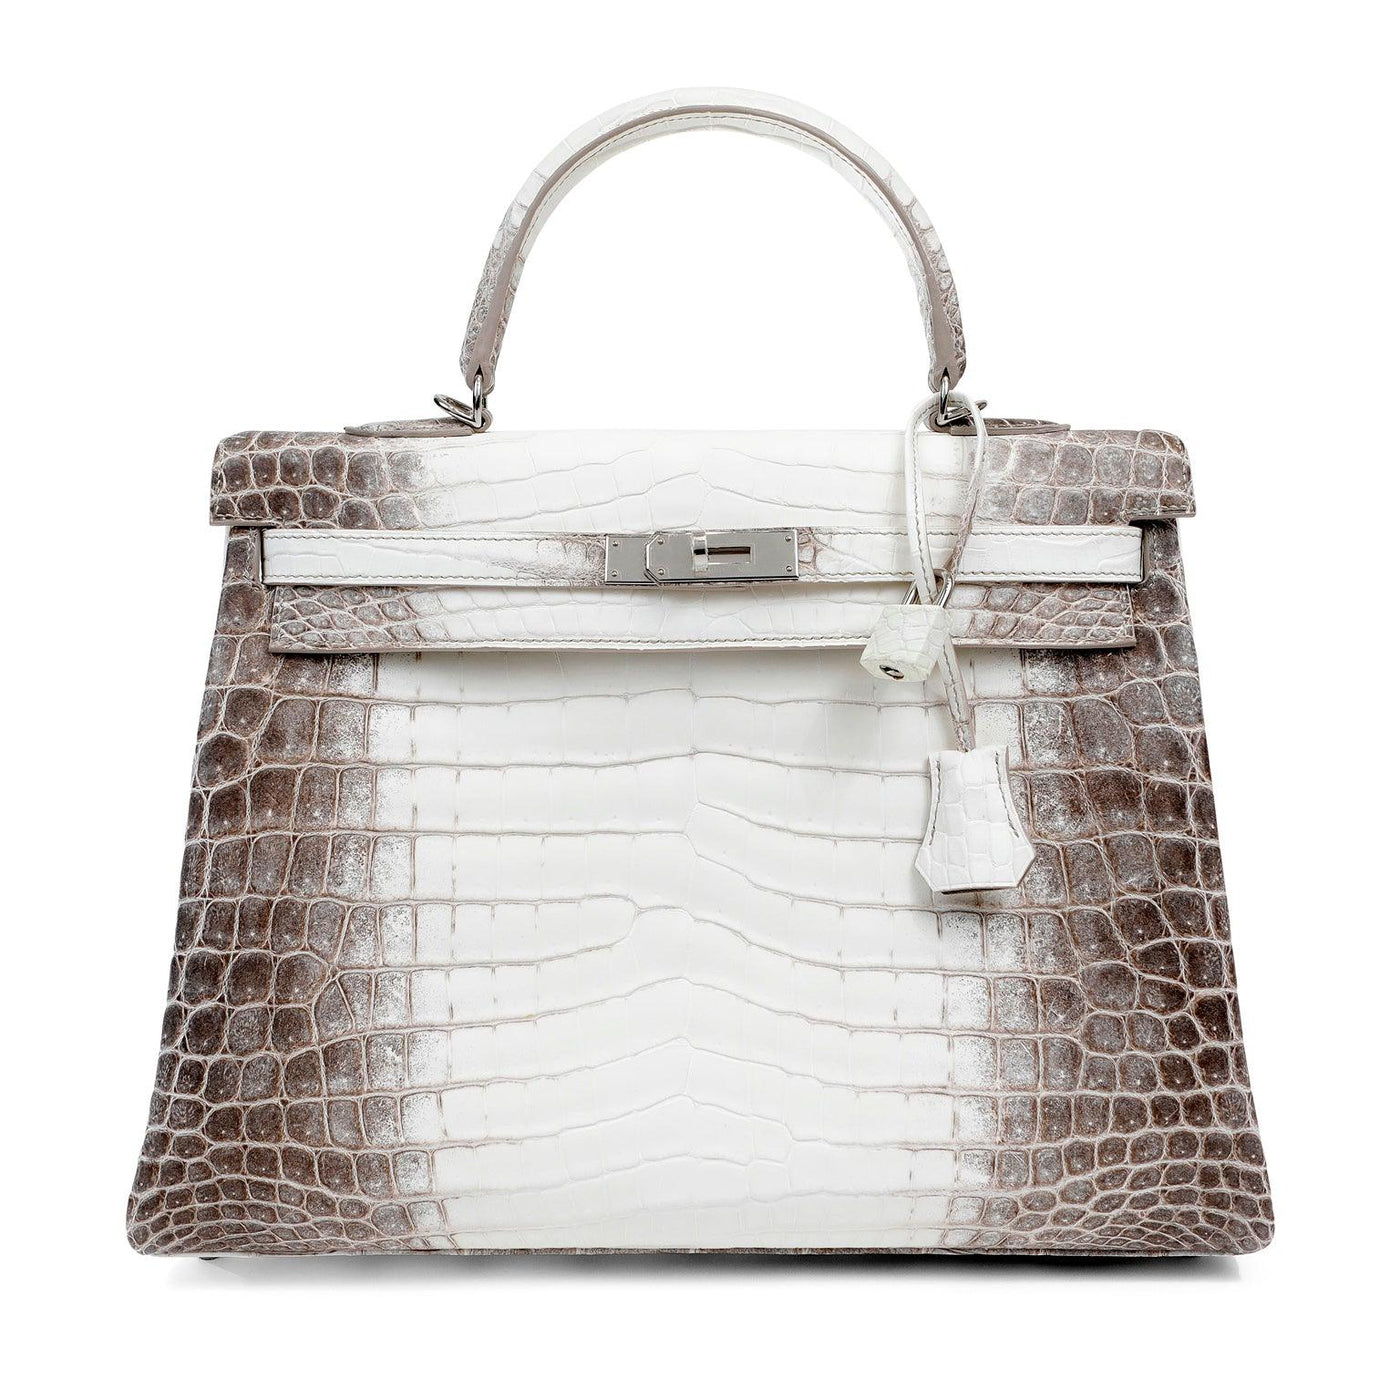 Discover the exclusive 2022 Special Edition Hermès 35cm Himalayan